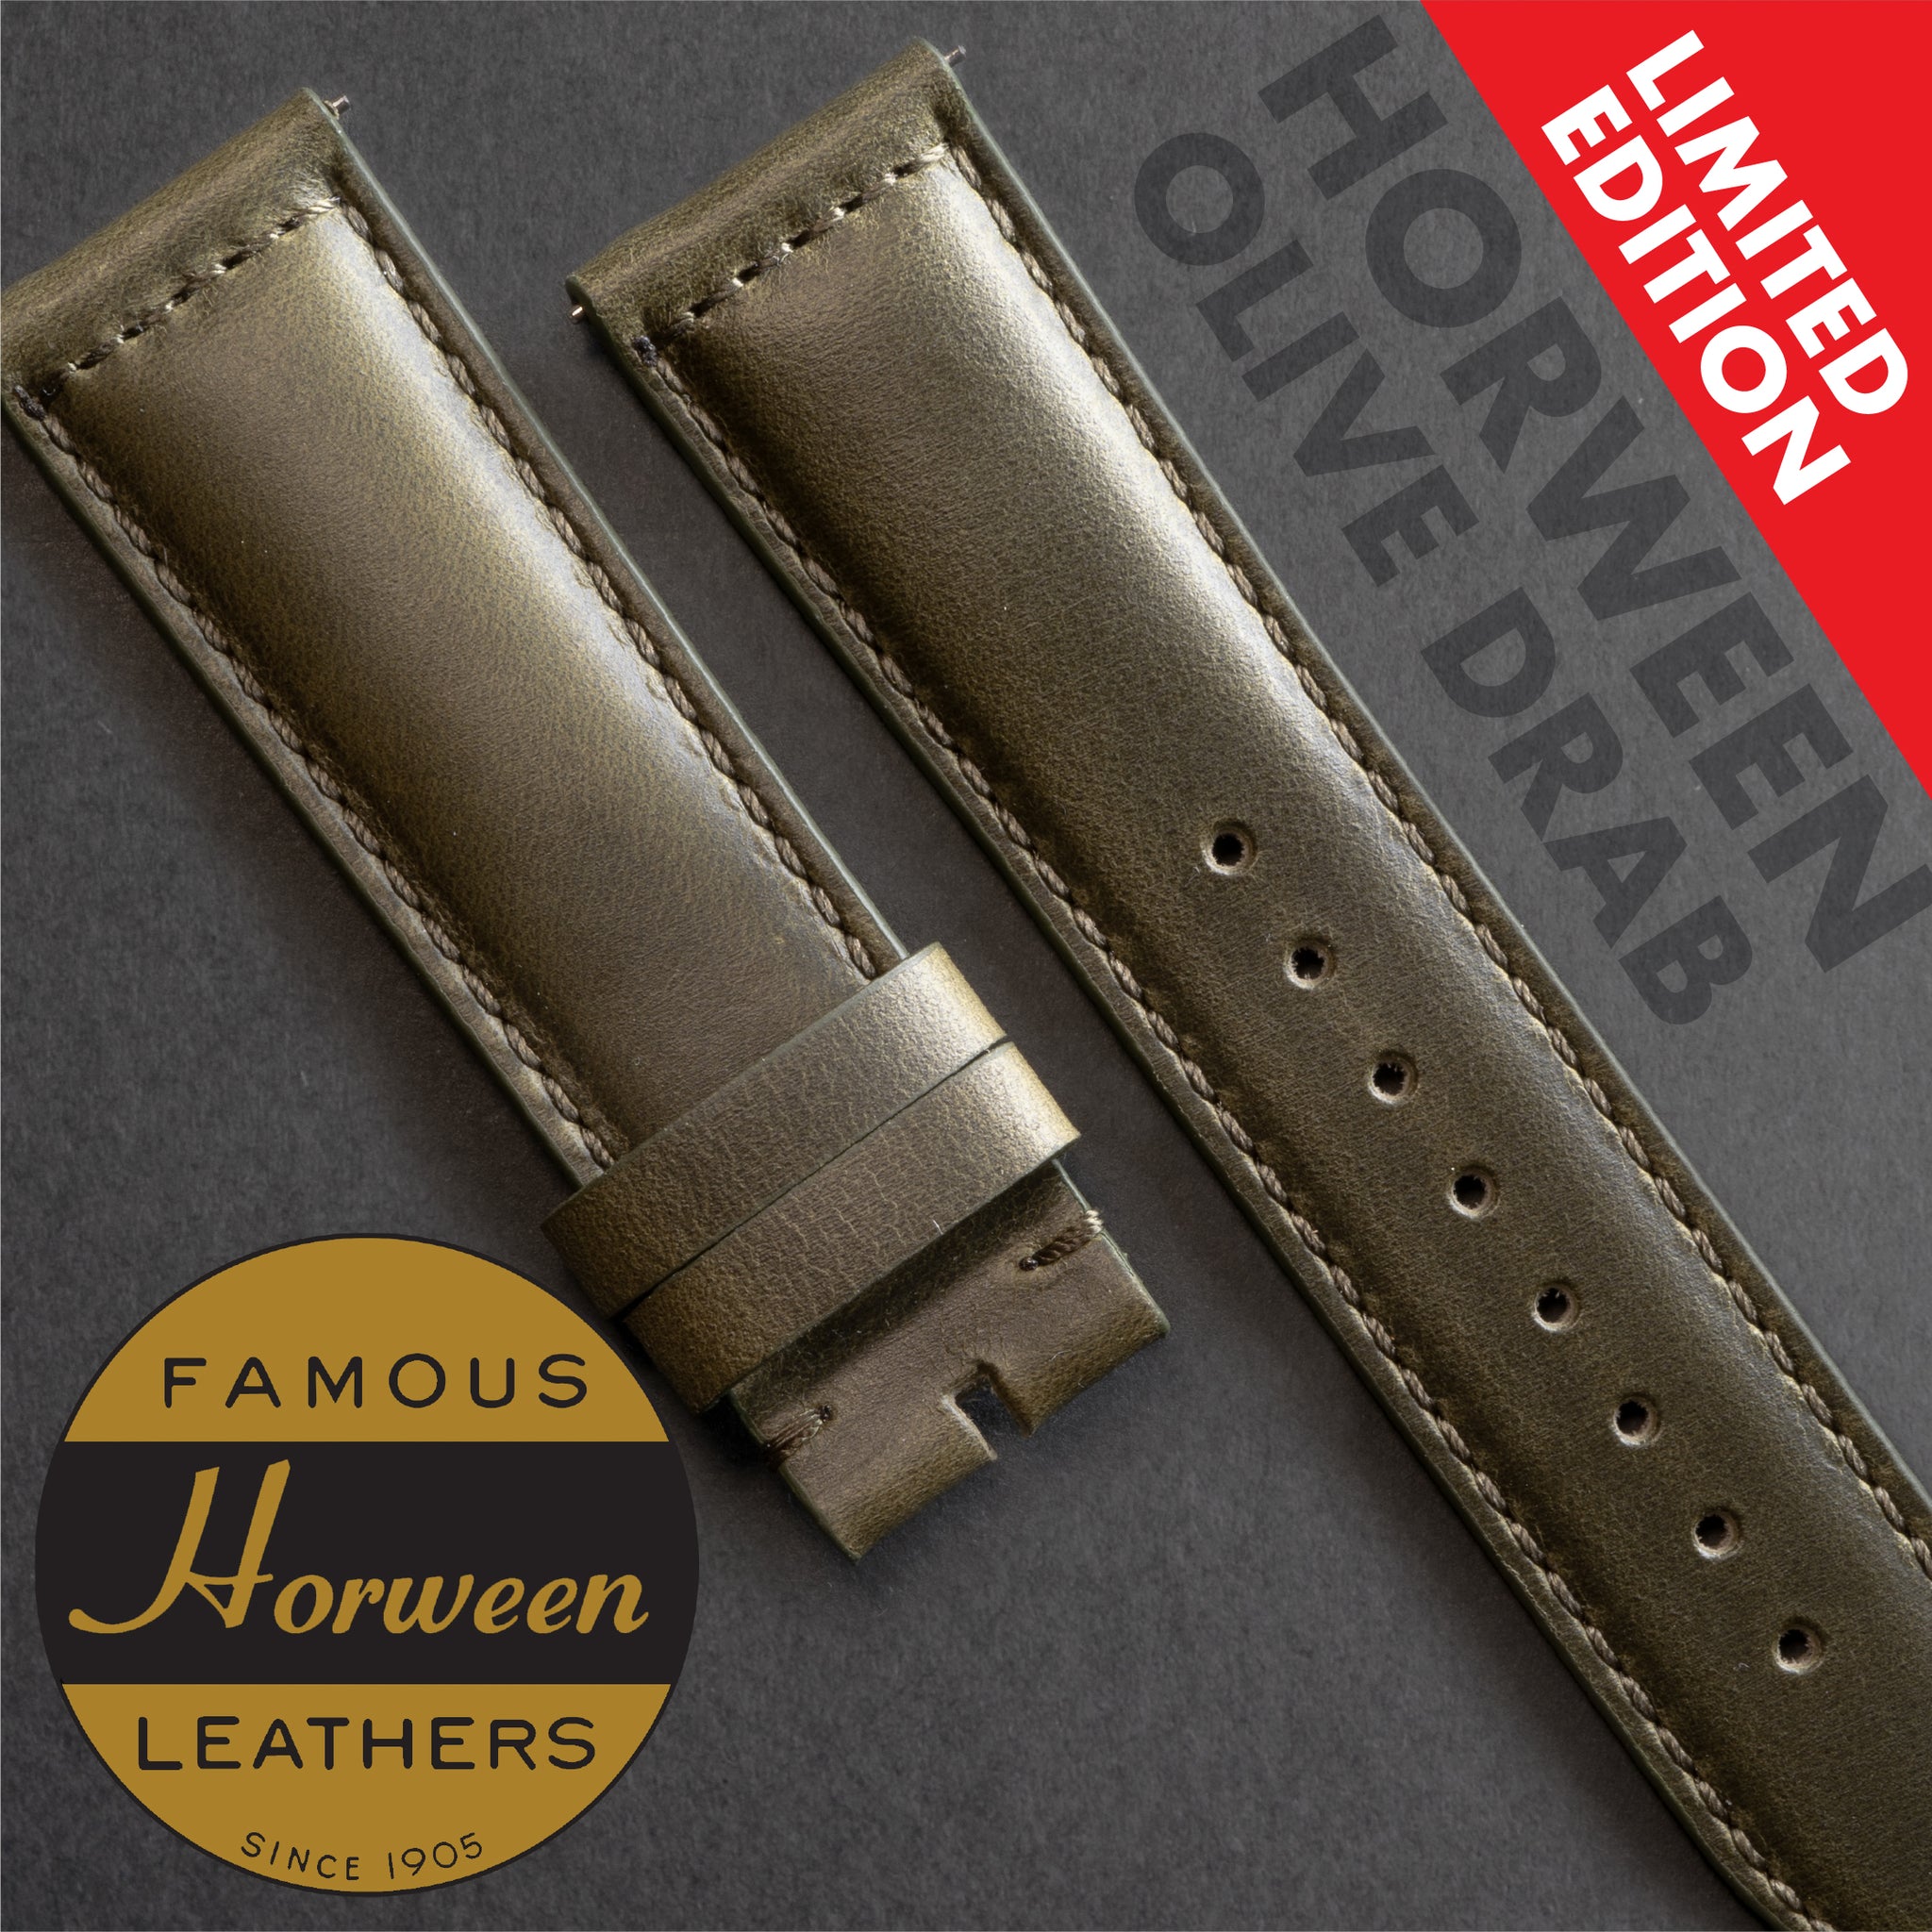 HOS - CayCan&Co. Horween Leather Strap (Random Colors) Horween真皮